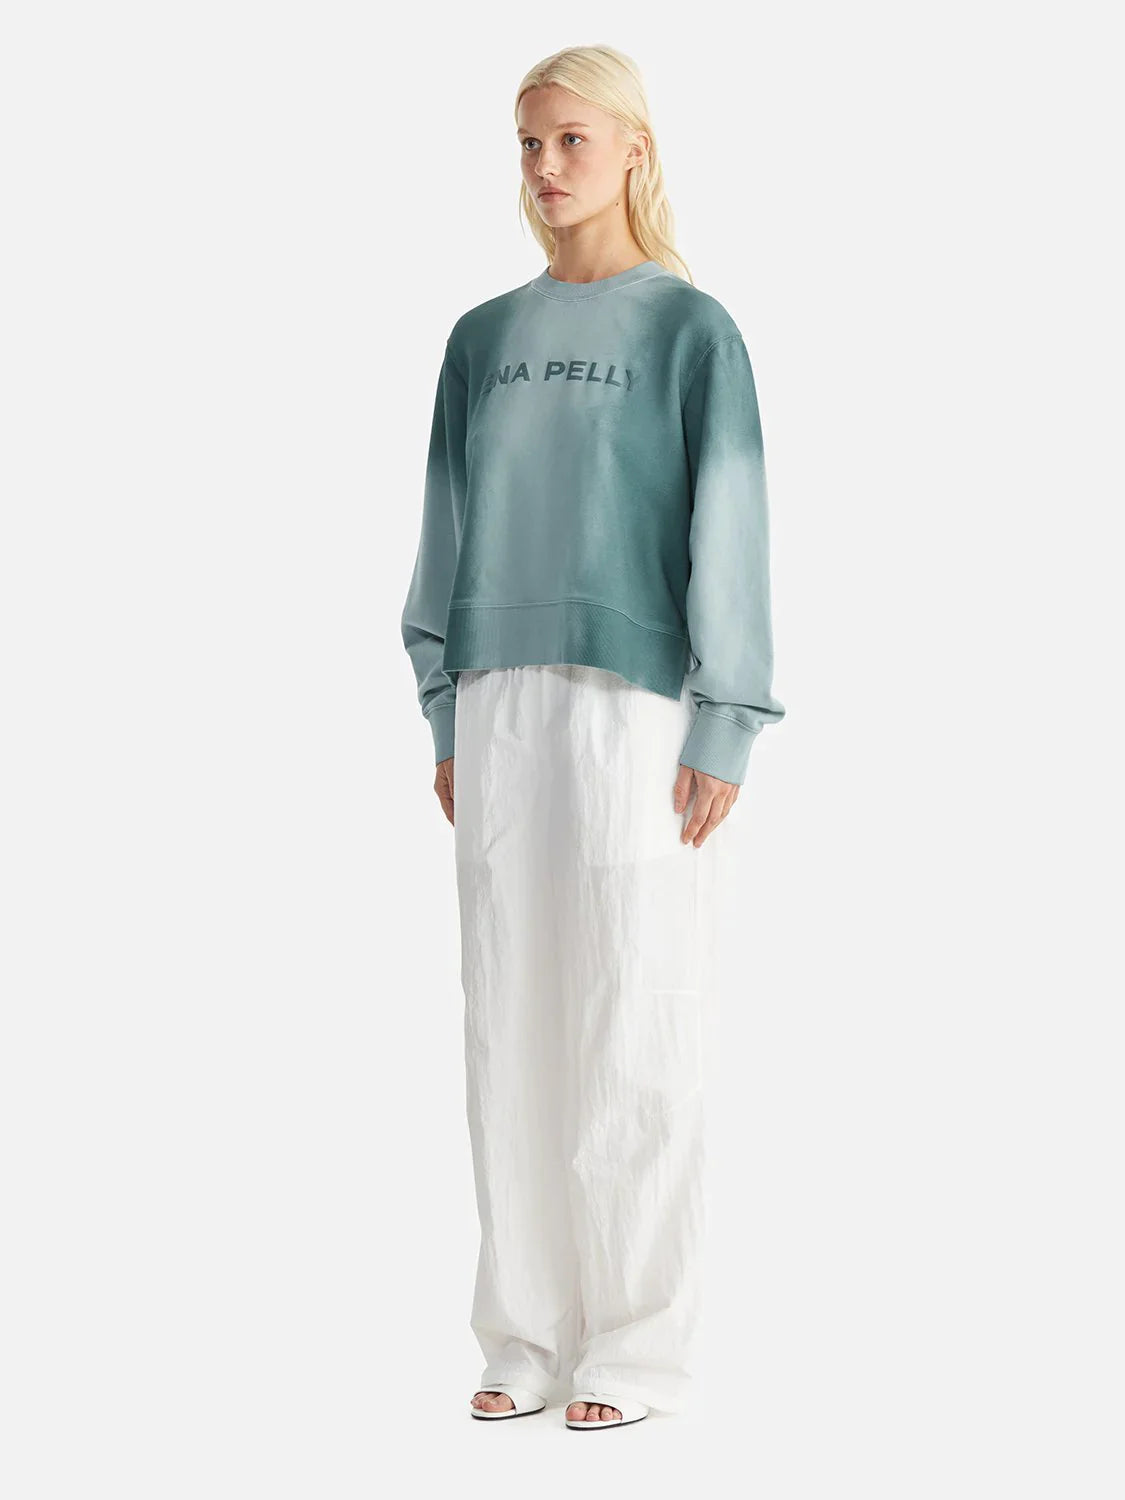 Ena Pelly - Remi Relaxed Sweater